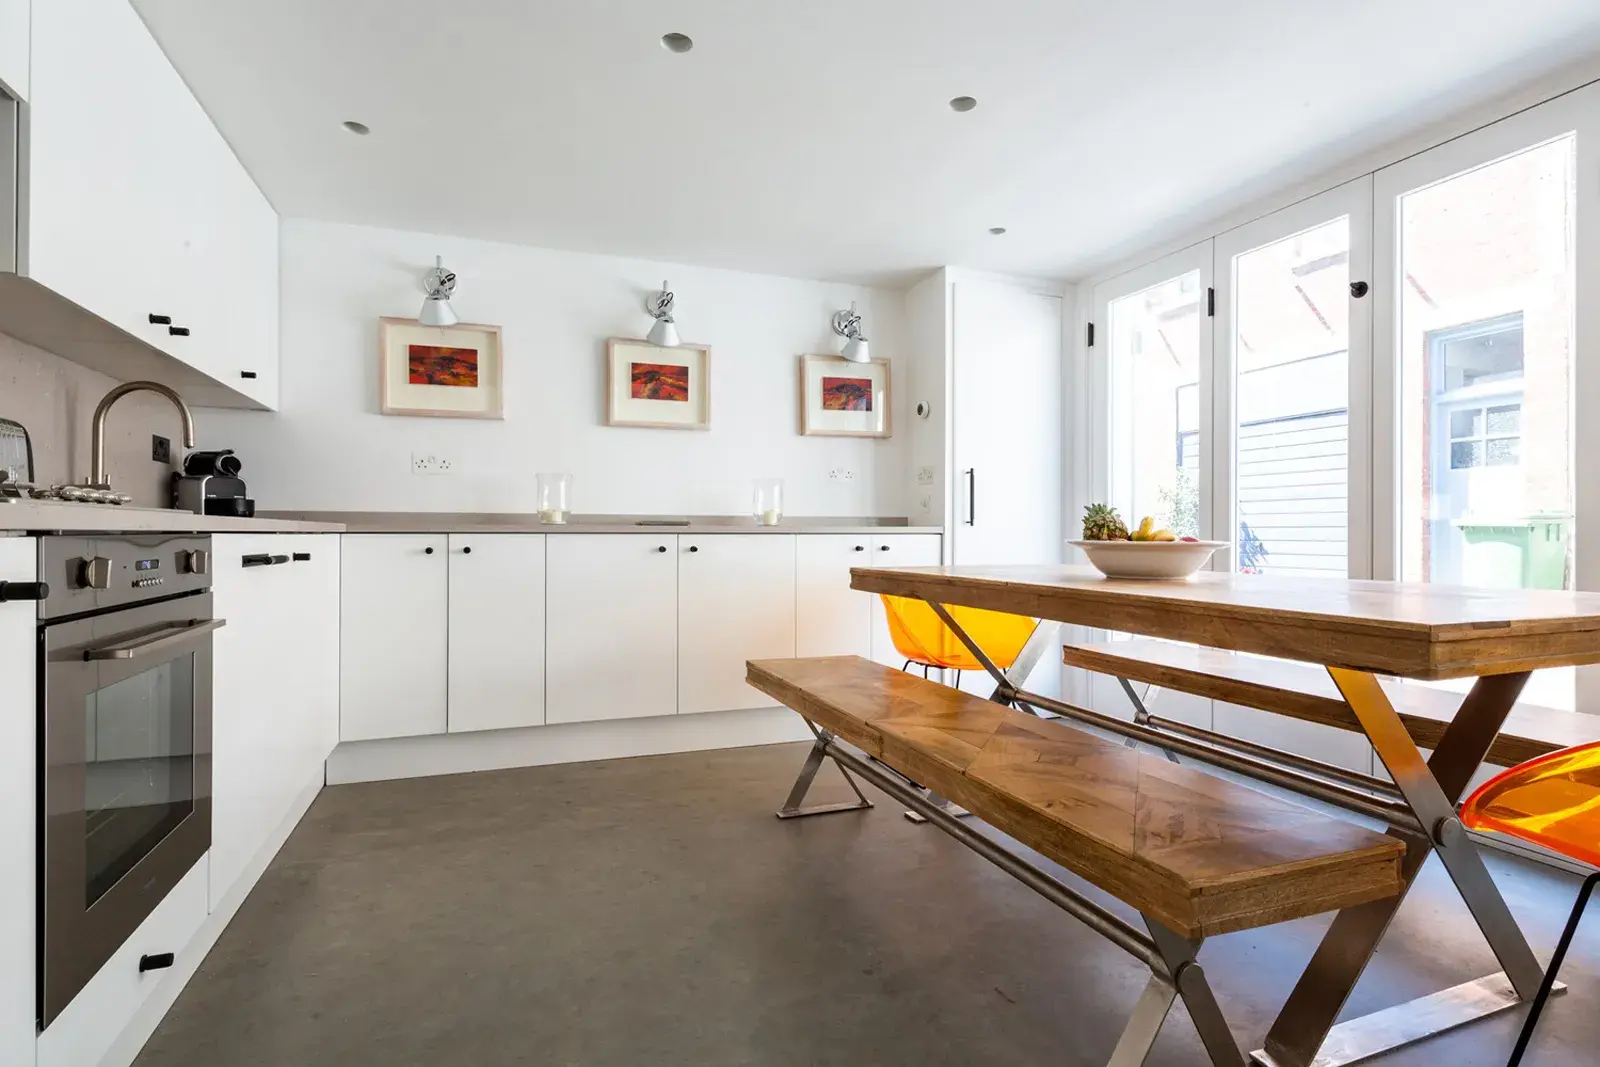 Bark Place, holiday home in Bayswater, London